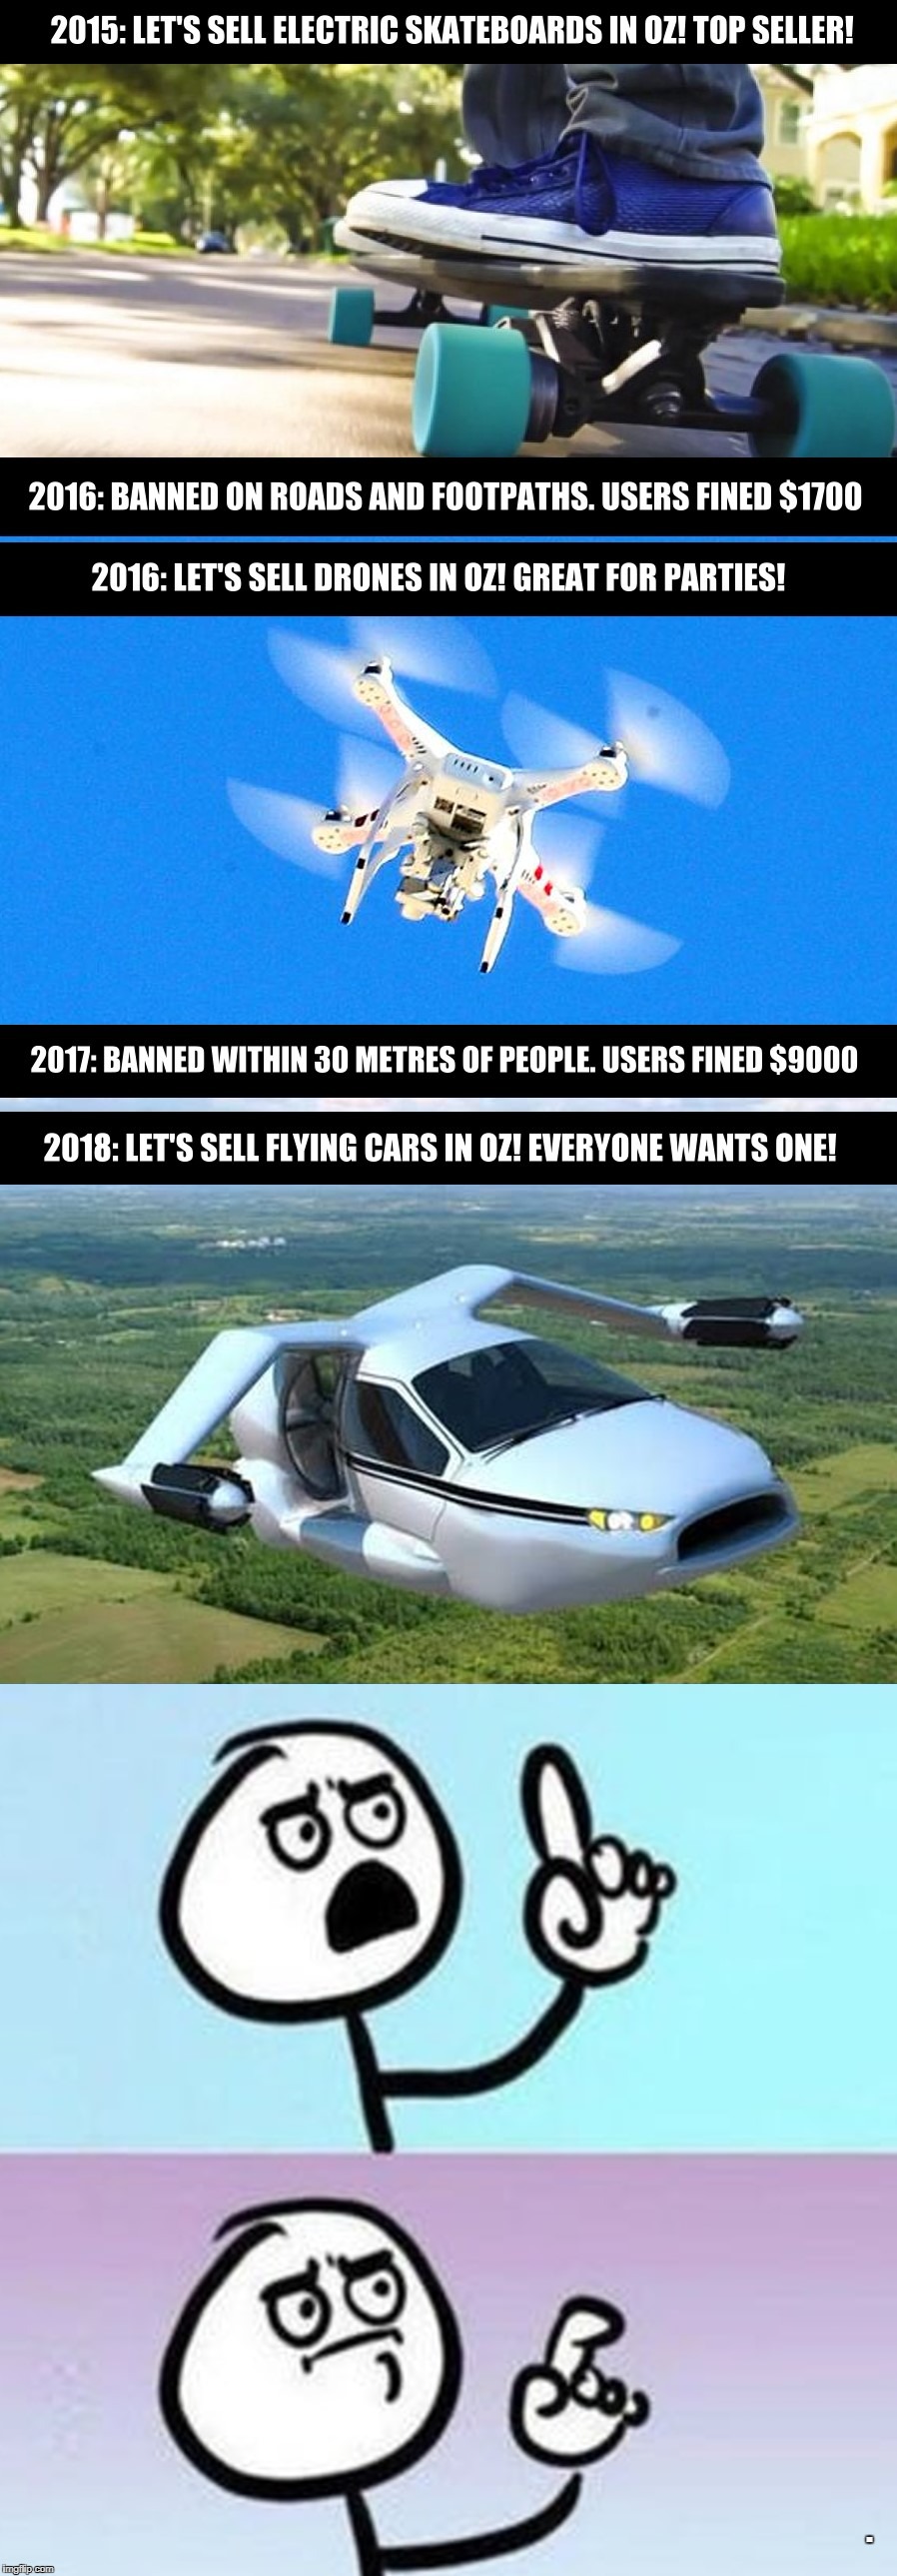 Why we'll never get flying cars! | . | image tagged in flying cars,hoverboards,electric skateboards,drones,meanwhile in australia | made w/ Imgflip meme maker